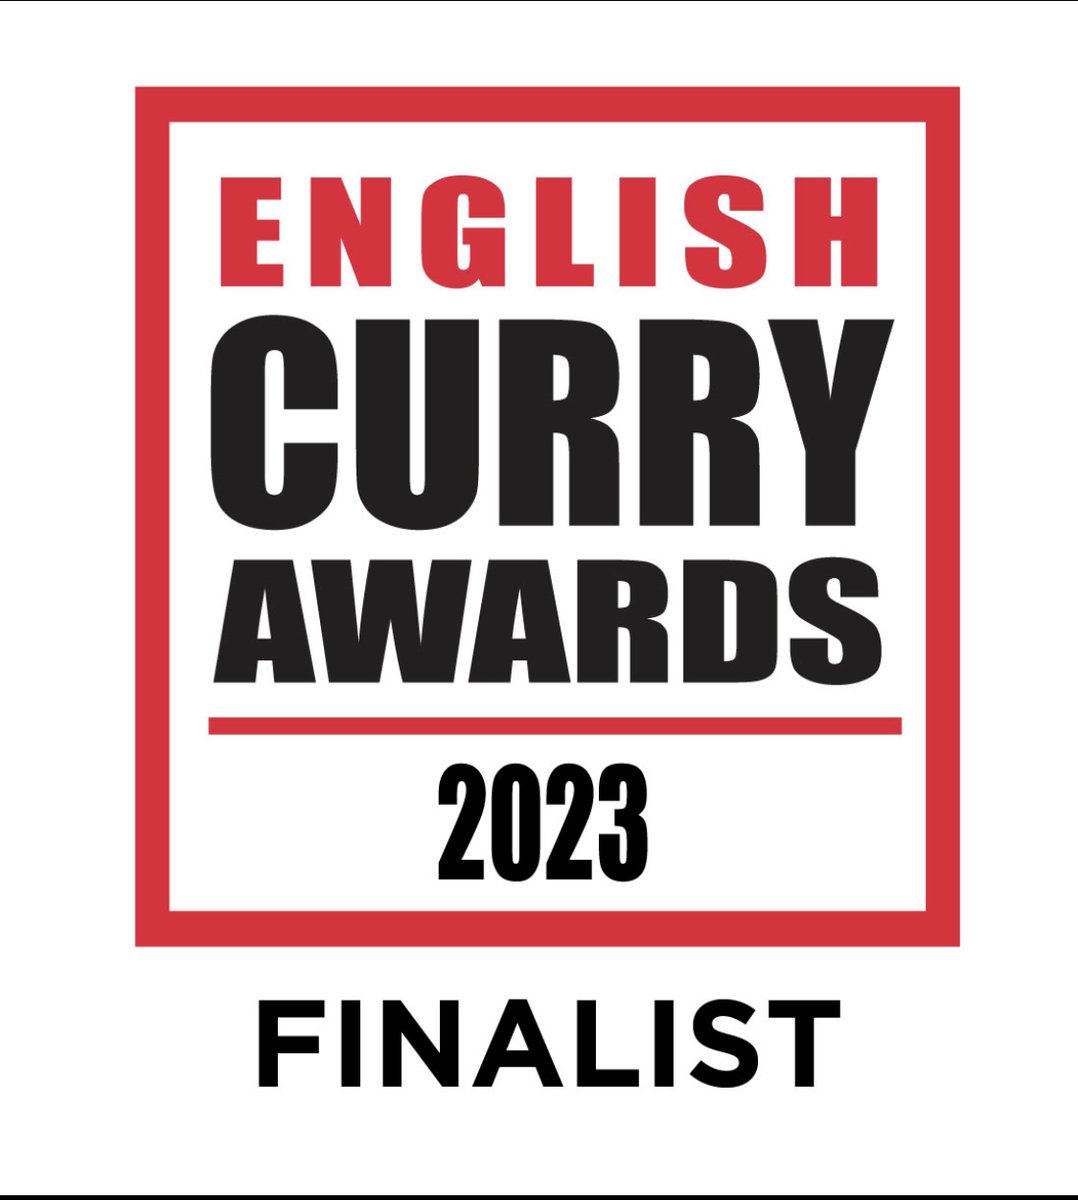 After Winning Last Year Once Again This Year we Are Finalist This Year’s English curryawards 2023 @GandhiST11 #LoveCurry #award #awardwinning #food #indianfood #curry #love #foodie #restaurant #takeaway #chef #StokeOnTrent #Staffordshire #WESTMIDLANDS #bestrestaurant #FYP #st11